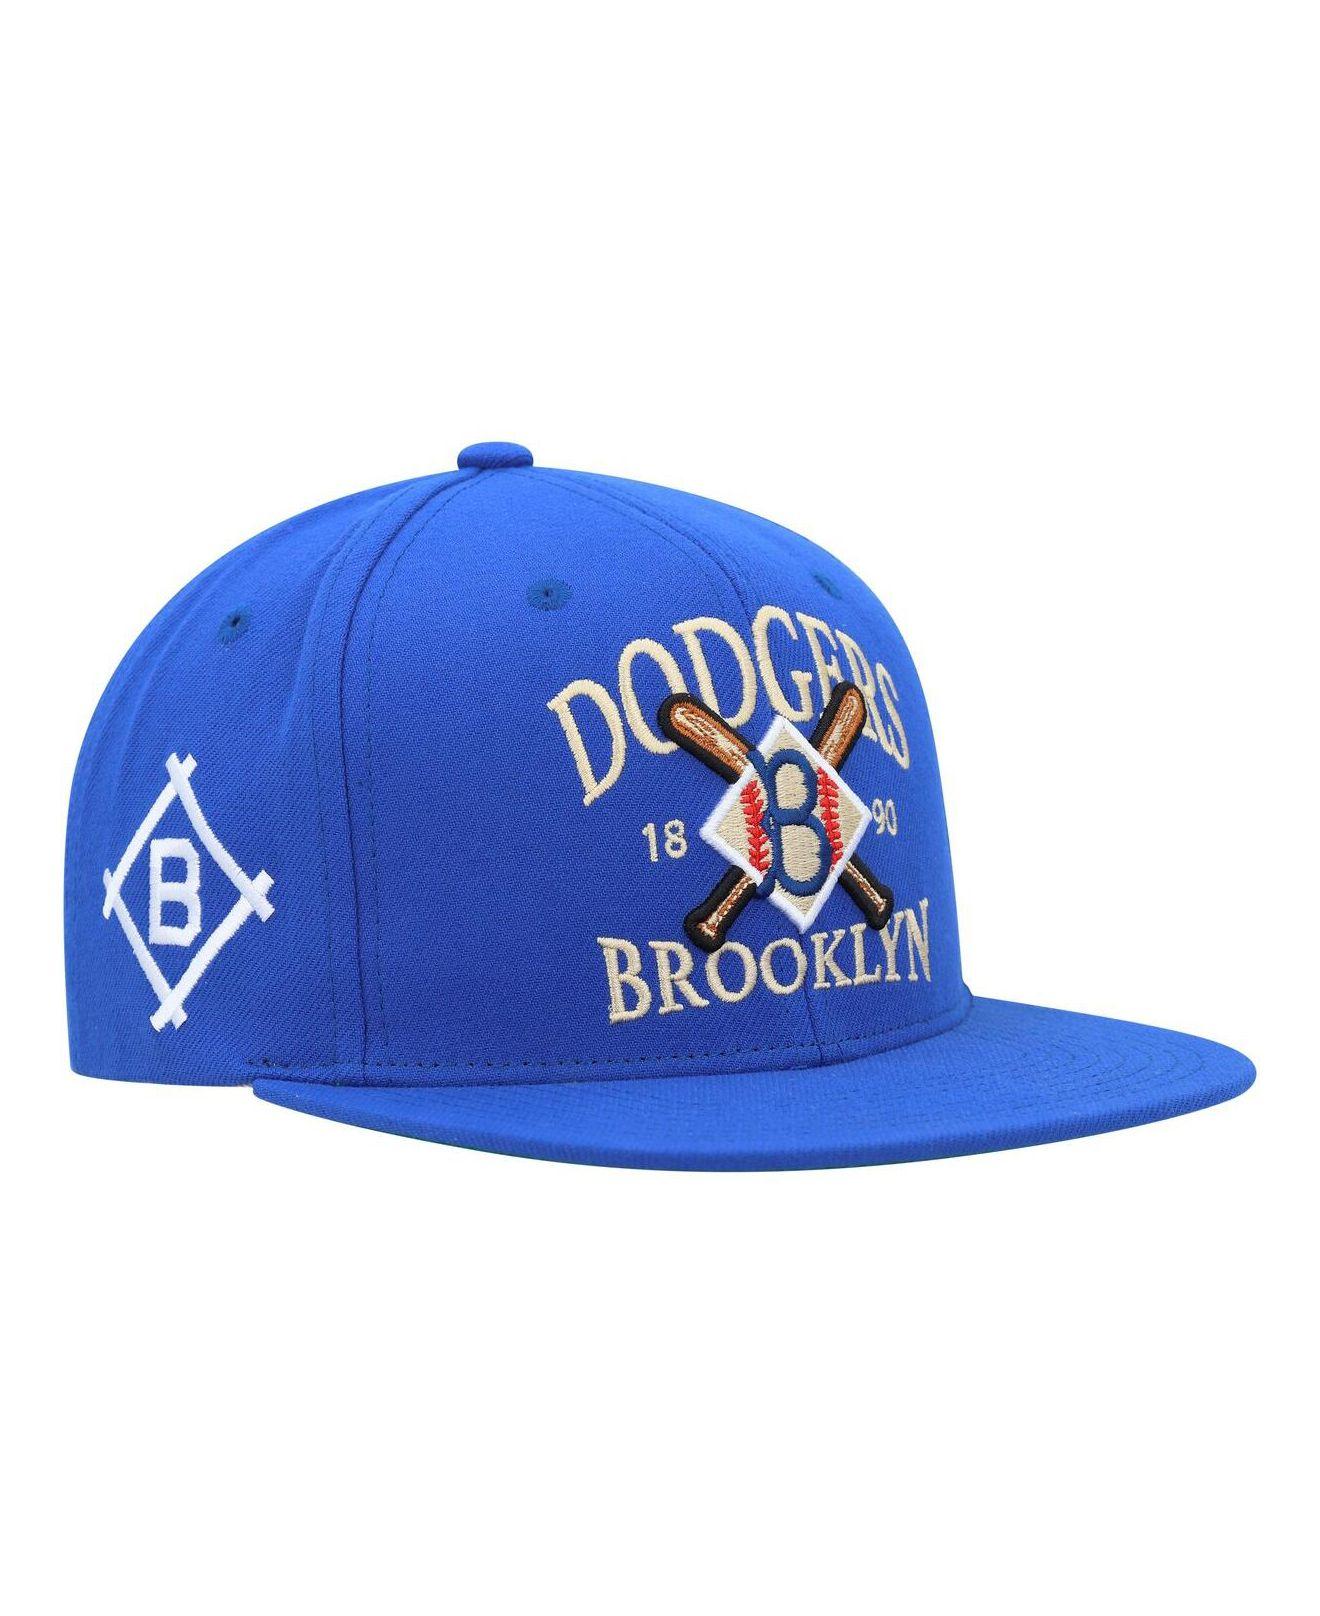 Texas Rangers Mitchell & Ness Cooperstown Collection Evergreen Snapback Hat  - Royal